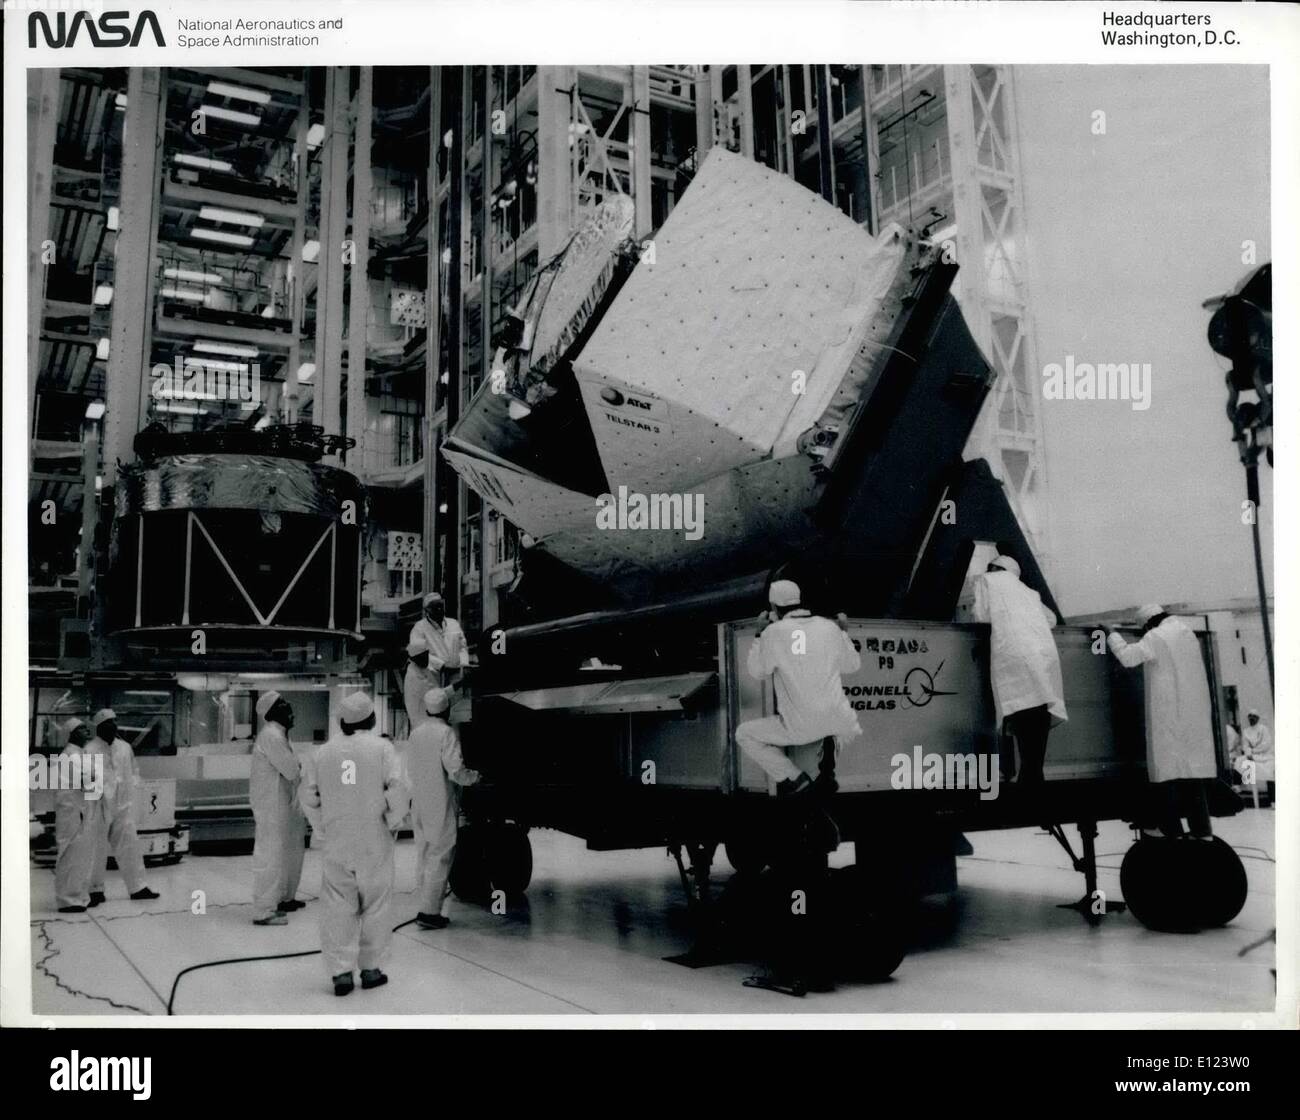 Jul. 07, 1984 - KENNEDY SPACE CENTER. Fla.--Its antenna array barely visible sticking out of the sunshield cradle, the TELSTAR 3/Payload Assist Module arrive at the Vertical Processing Facility for installation in the checkout stand. TELSTAR 3 is oce of three commercial satellites that the orbiter Discovery All deploy into orbit on the 41-0 mission scheduled for late August. To the left of TELSTAR, already installed in the test cell, is LEASAT-2, a Hughes-built communications spacecraft that will be leased to the U.S Stock Photo